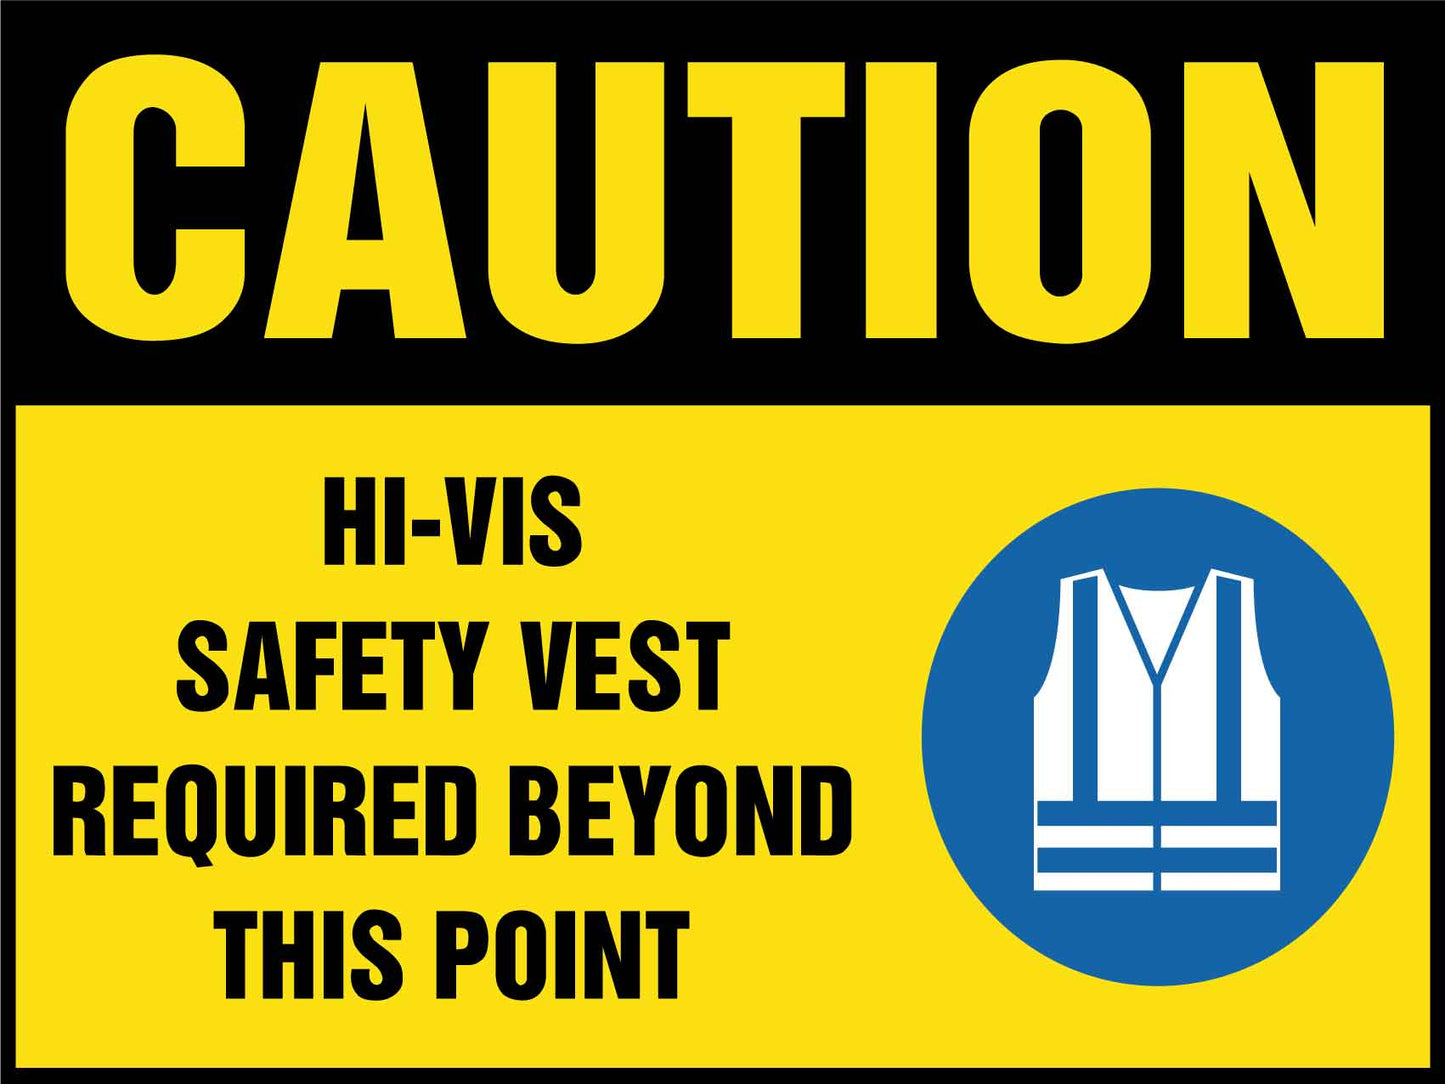 Caution Hi-Vis Safety Vest Required Beyond this Point Sign